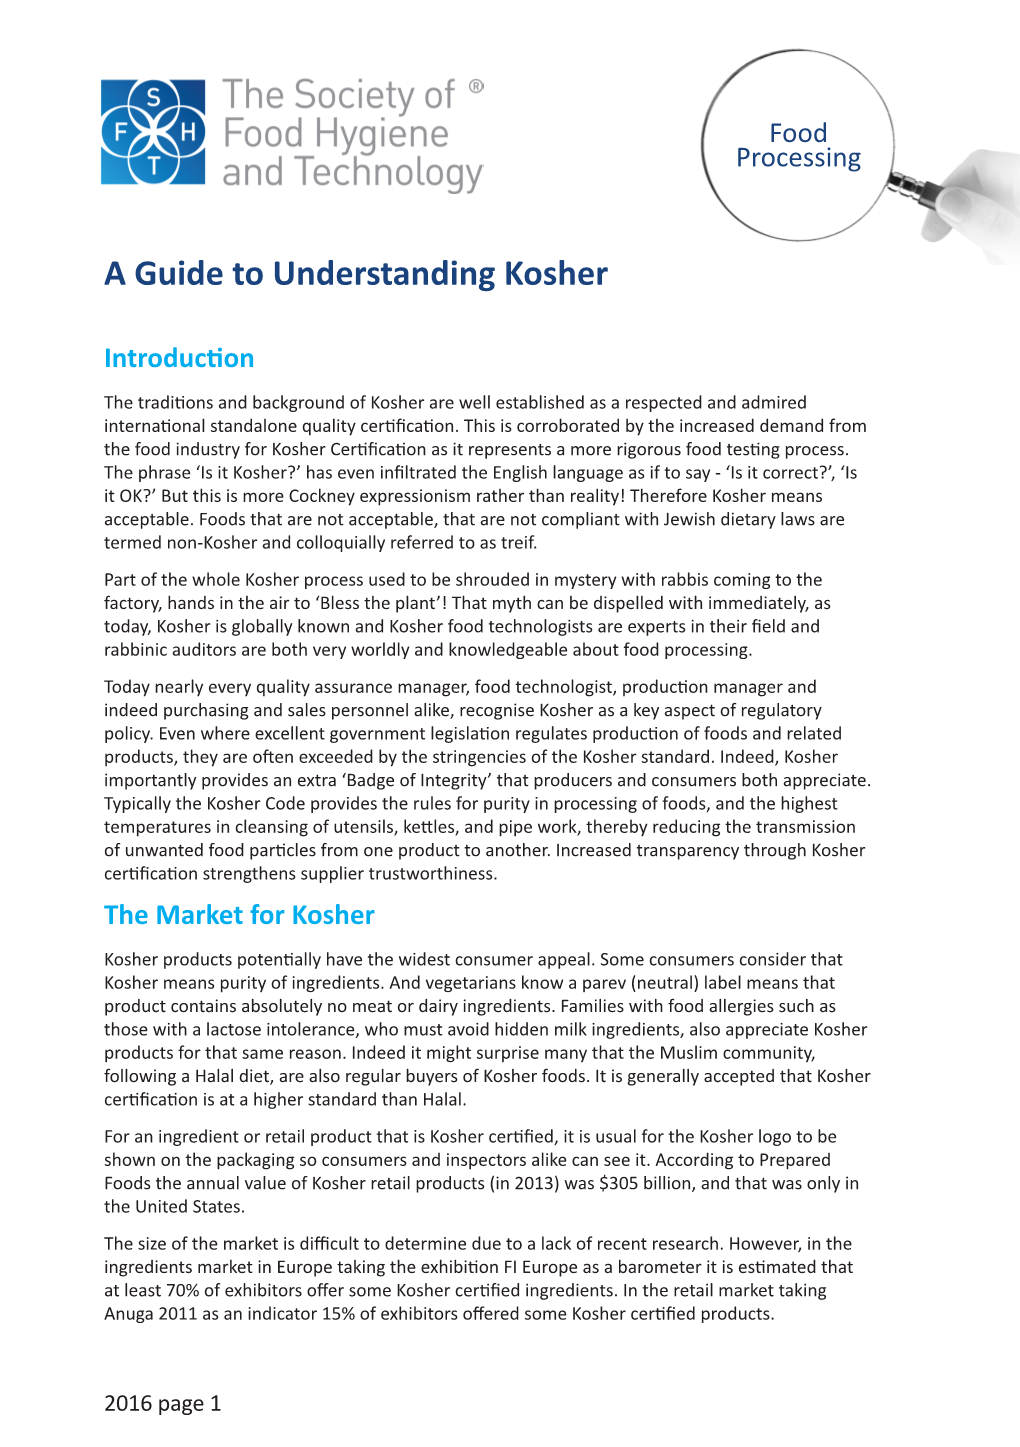 A Guide to Understanding Kosher